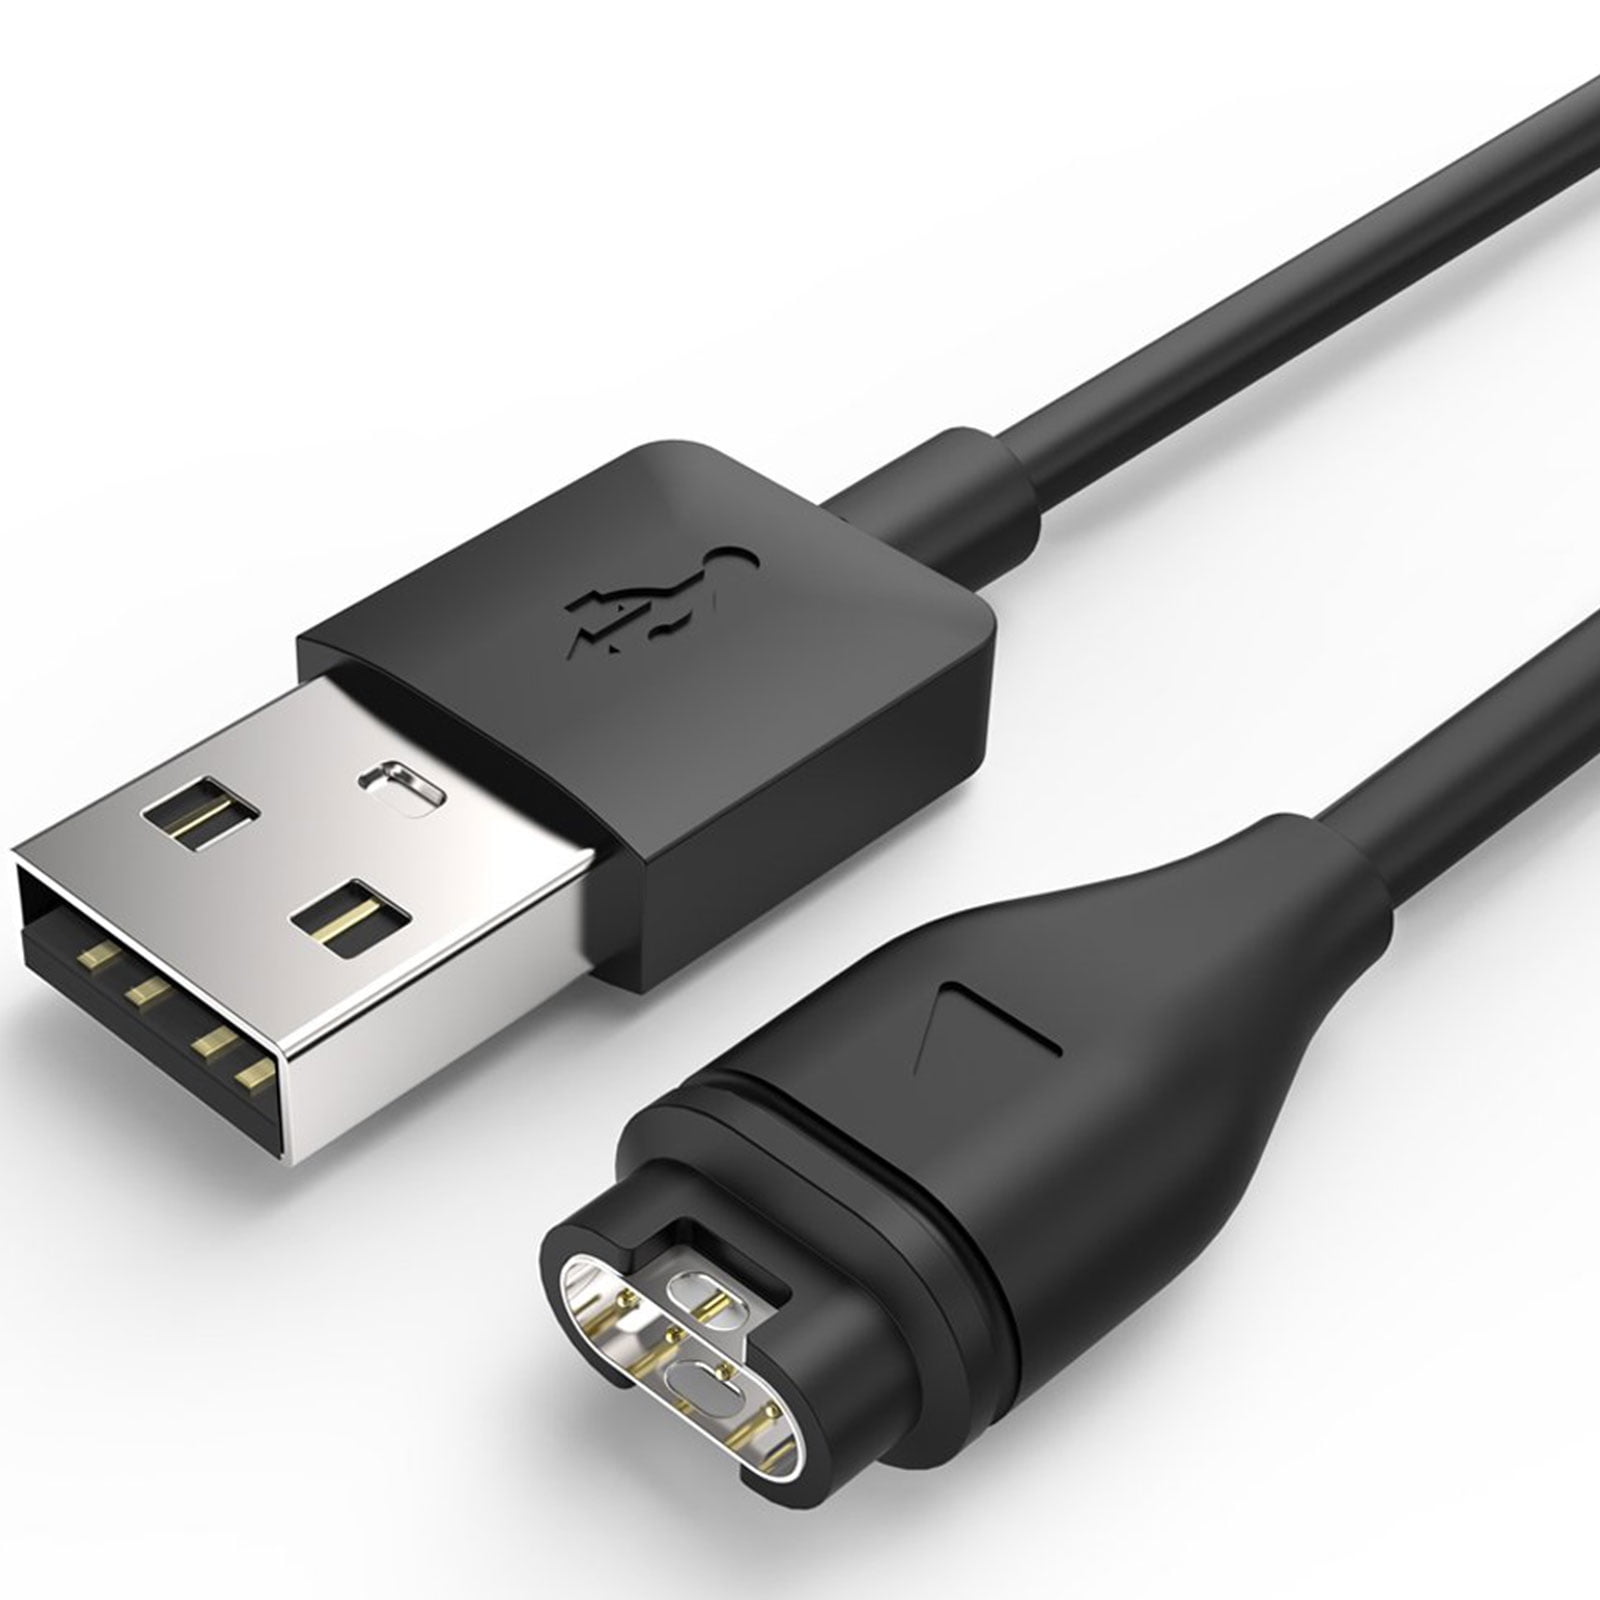 Garmin USB Type-A to Apple Lightning Adapter Cable